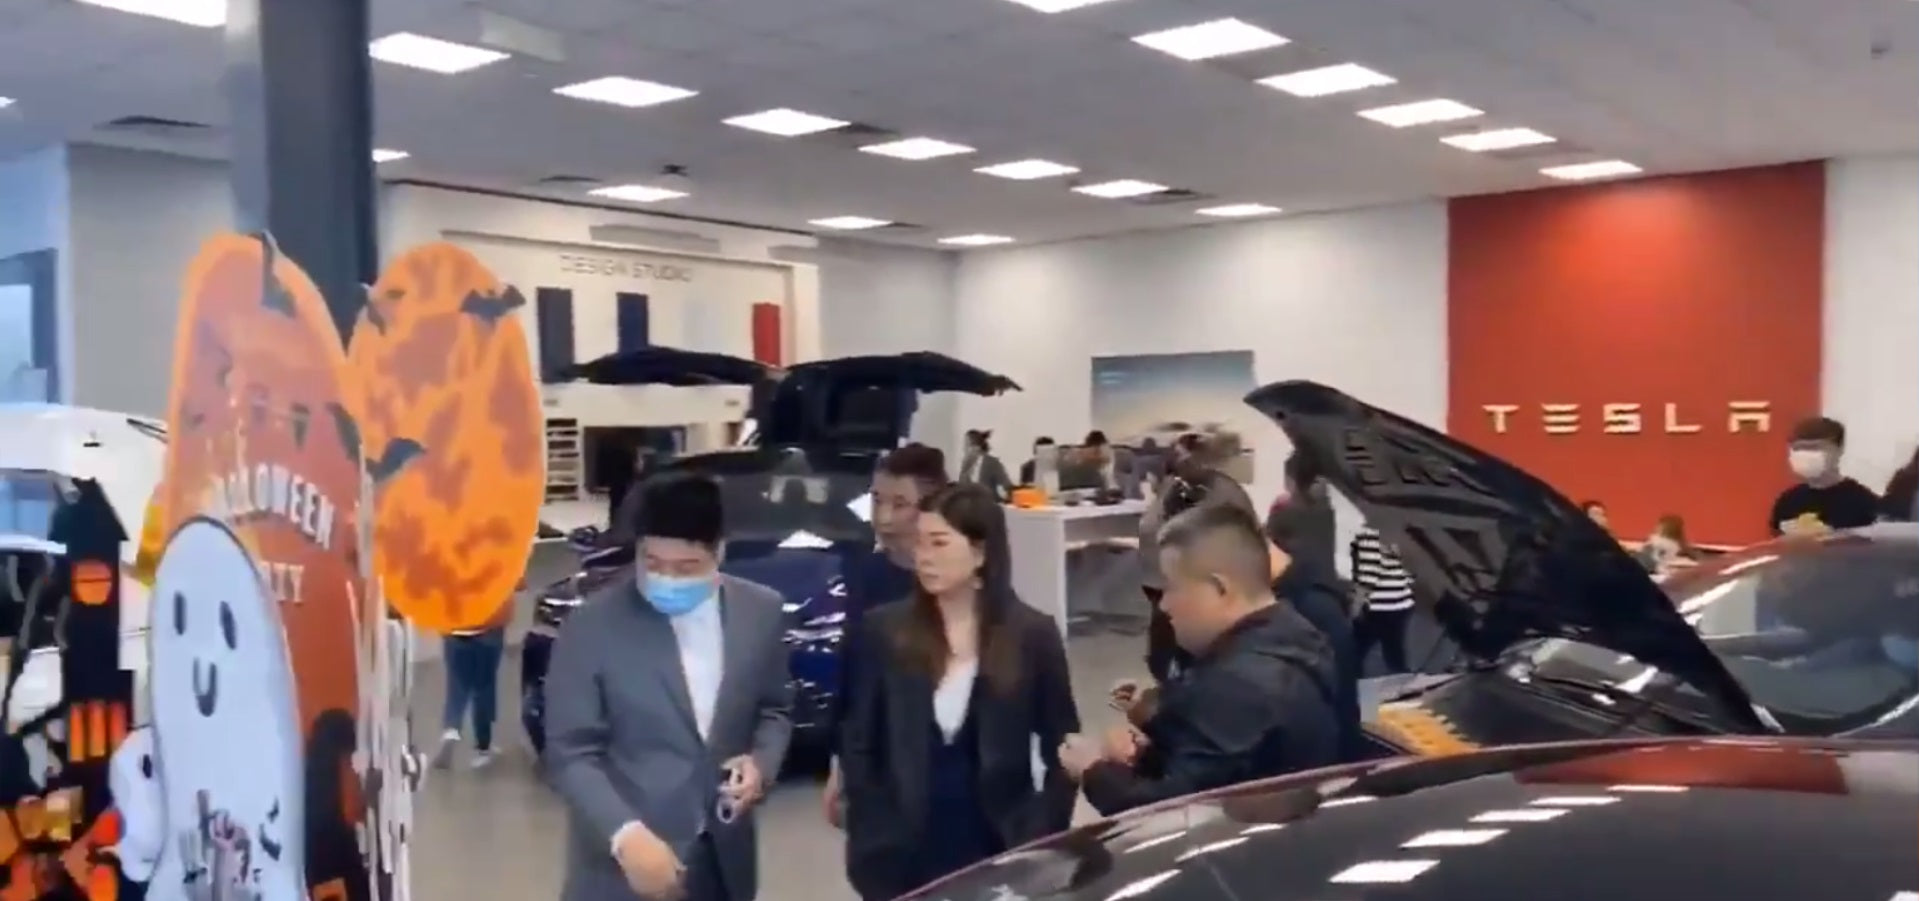 Tesla (TSLA) Demand in China Continues to Skyrocket as Stores Are Packed with Customers